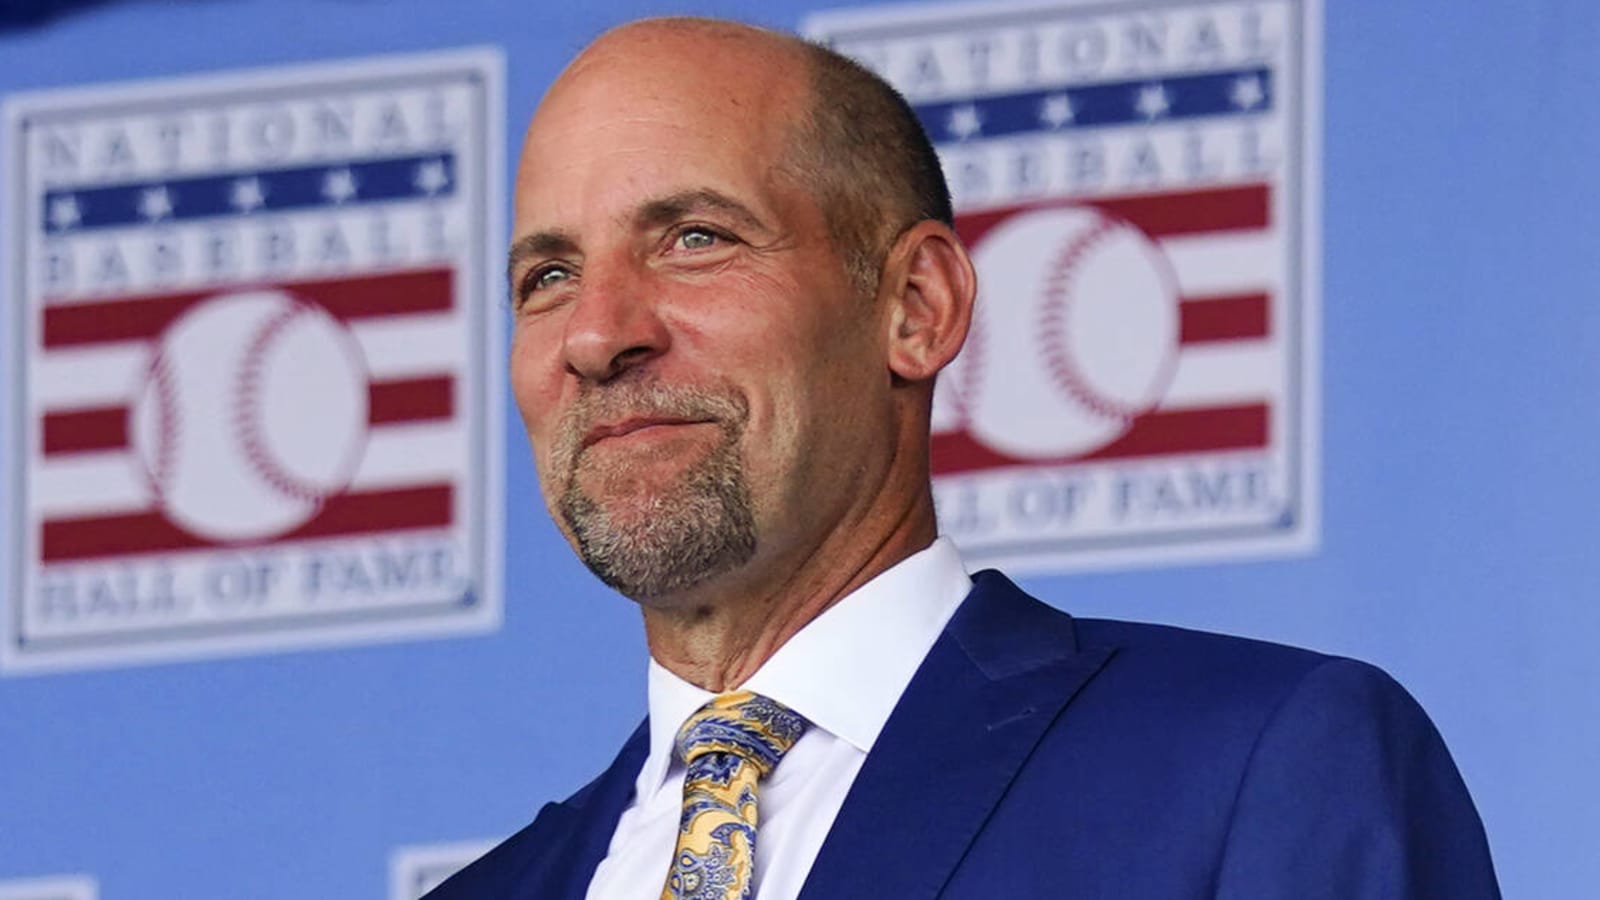 Davis, Smoltz to broadcast Field of Dreams Game between Reds, Cubs